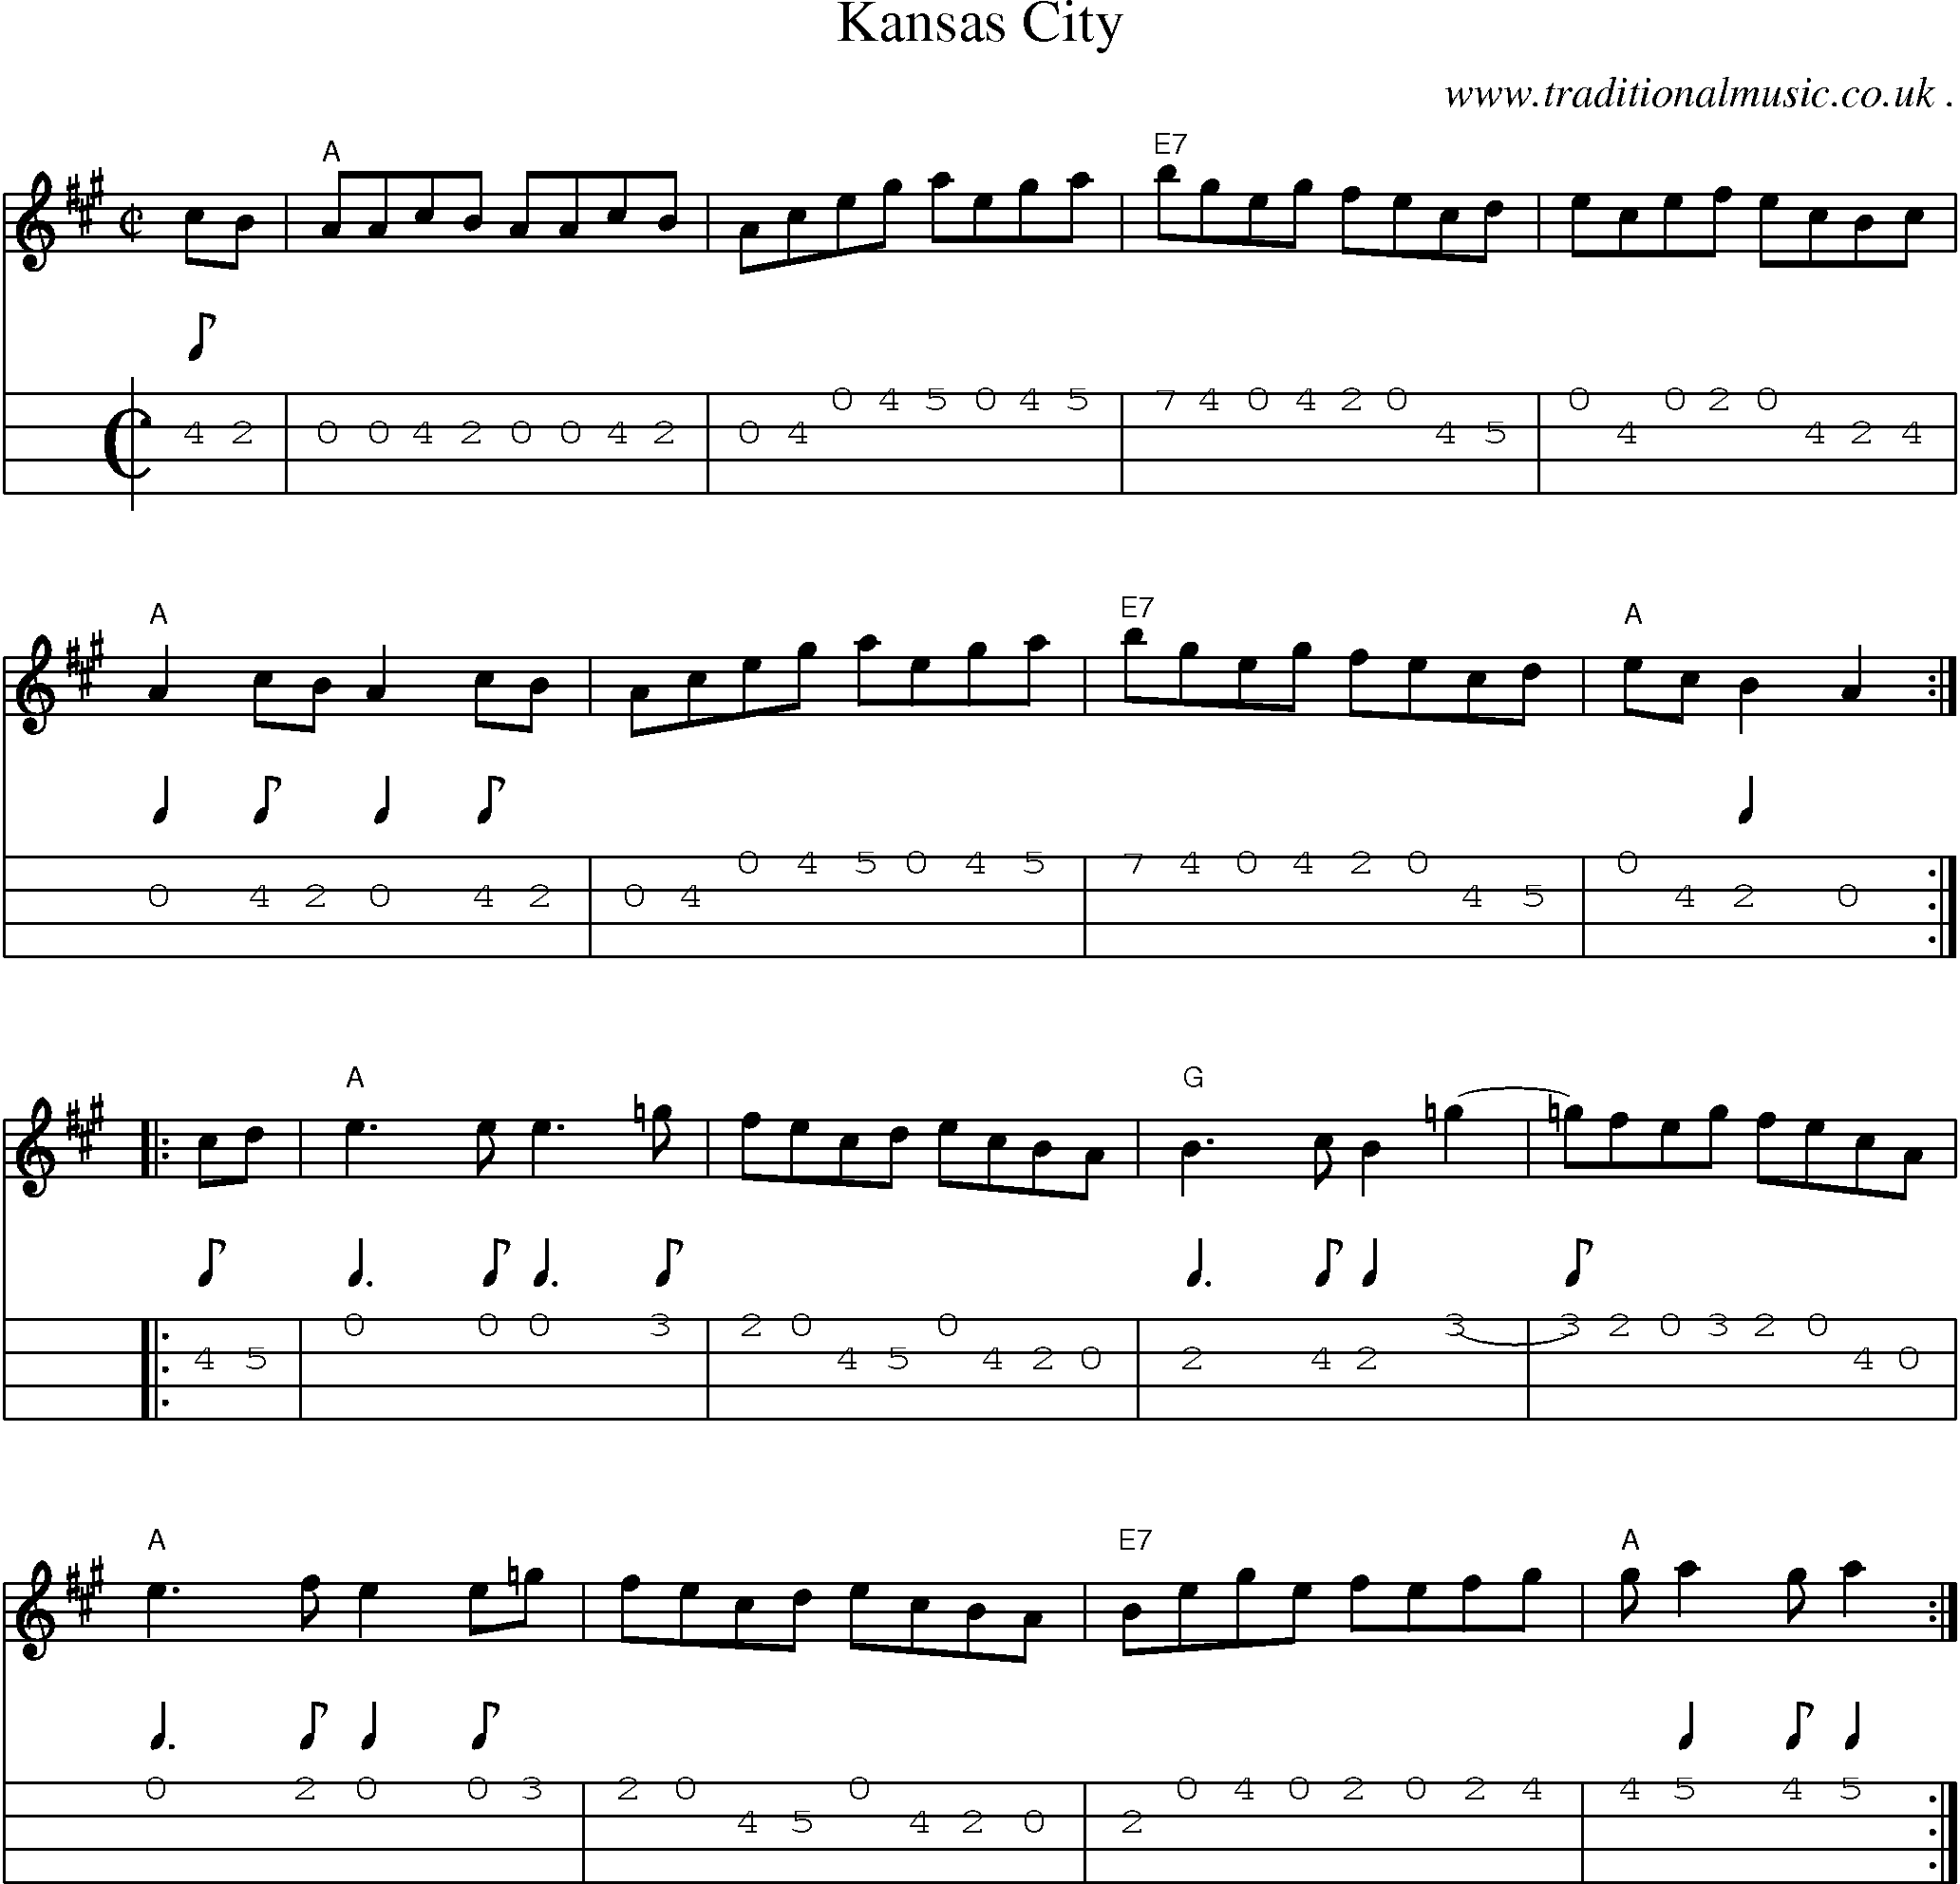 Music Score and Guitar Tabs for Kansas City